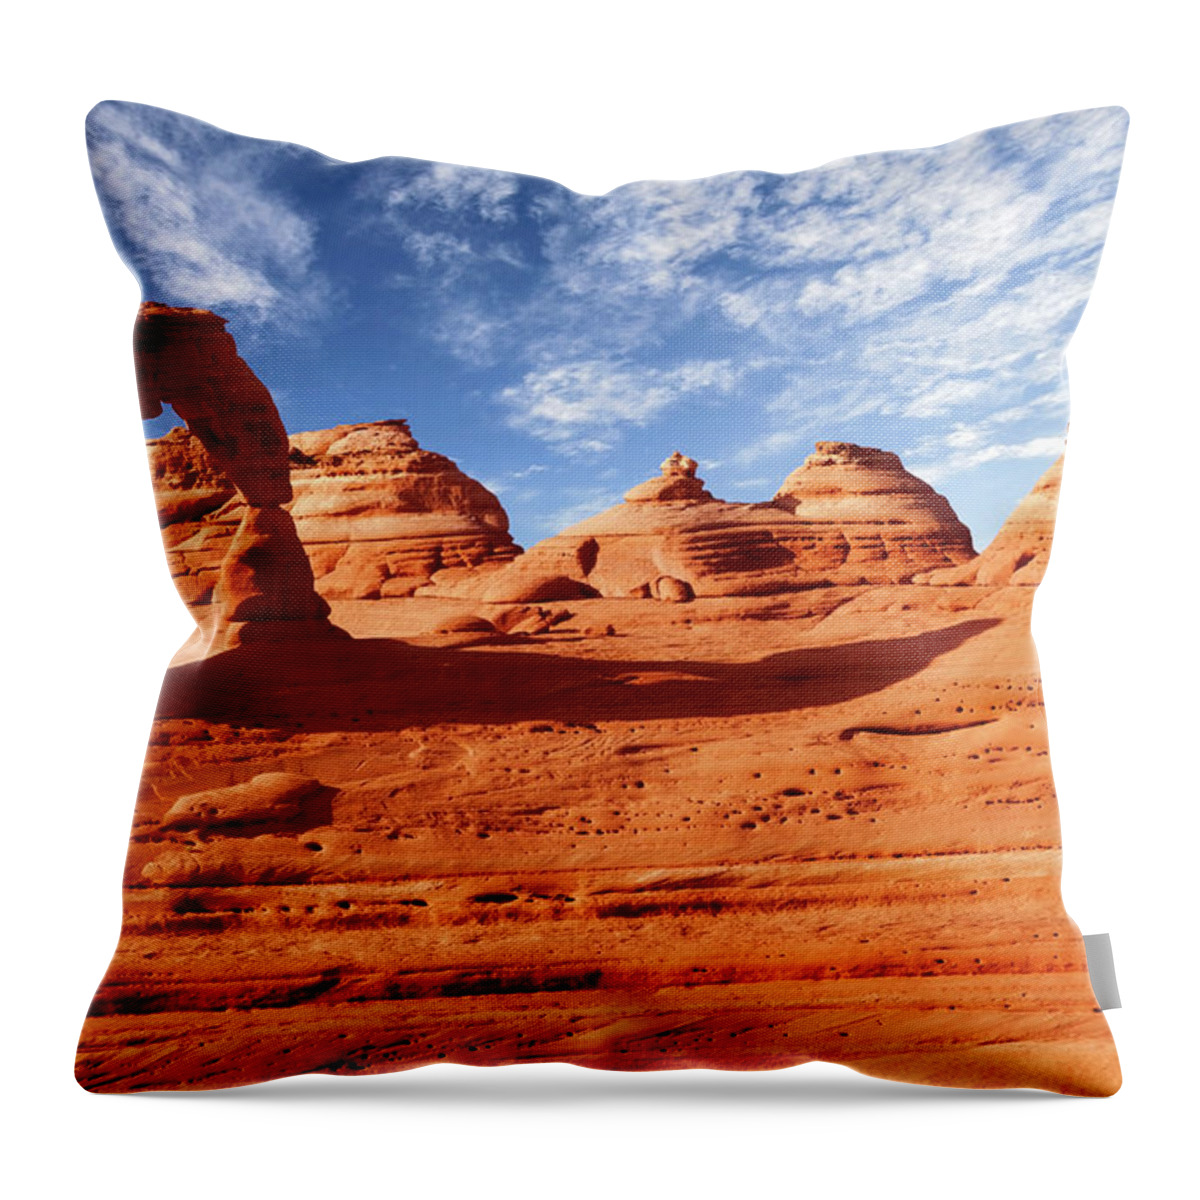 Geology Throw Pillow featuring the photograph Arches by Wsfurlan